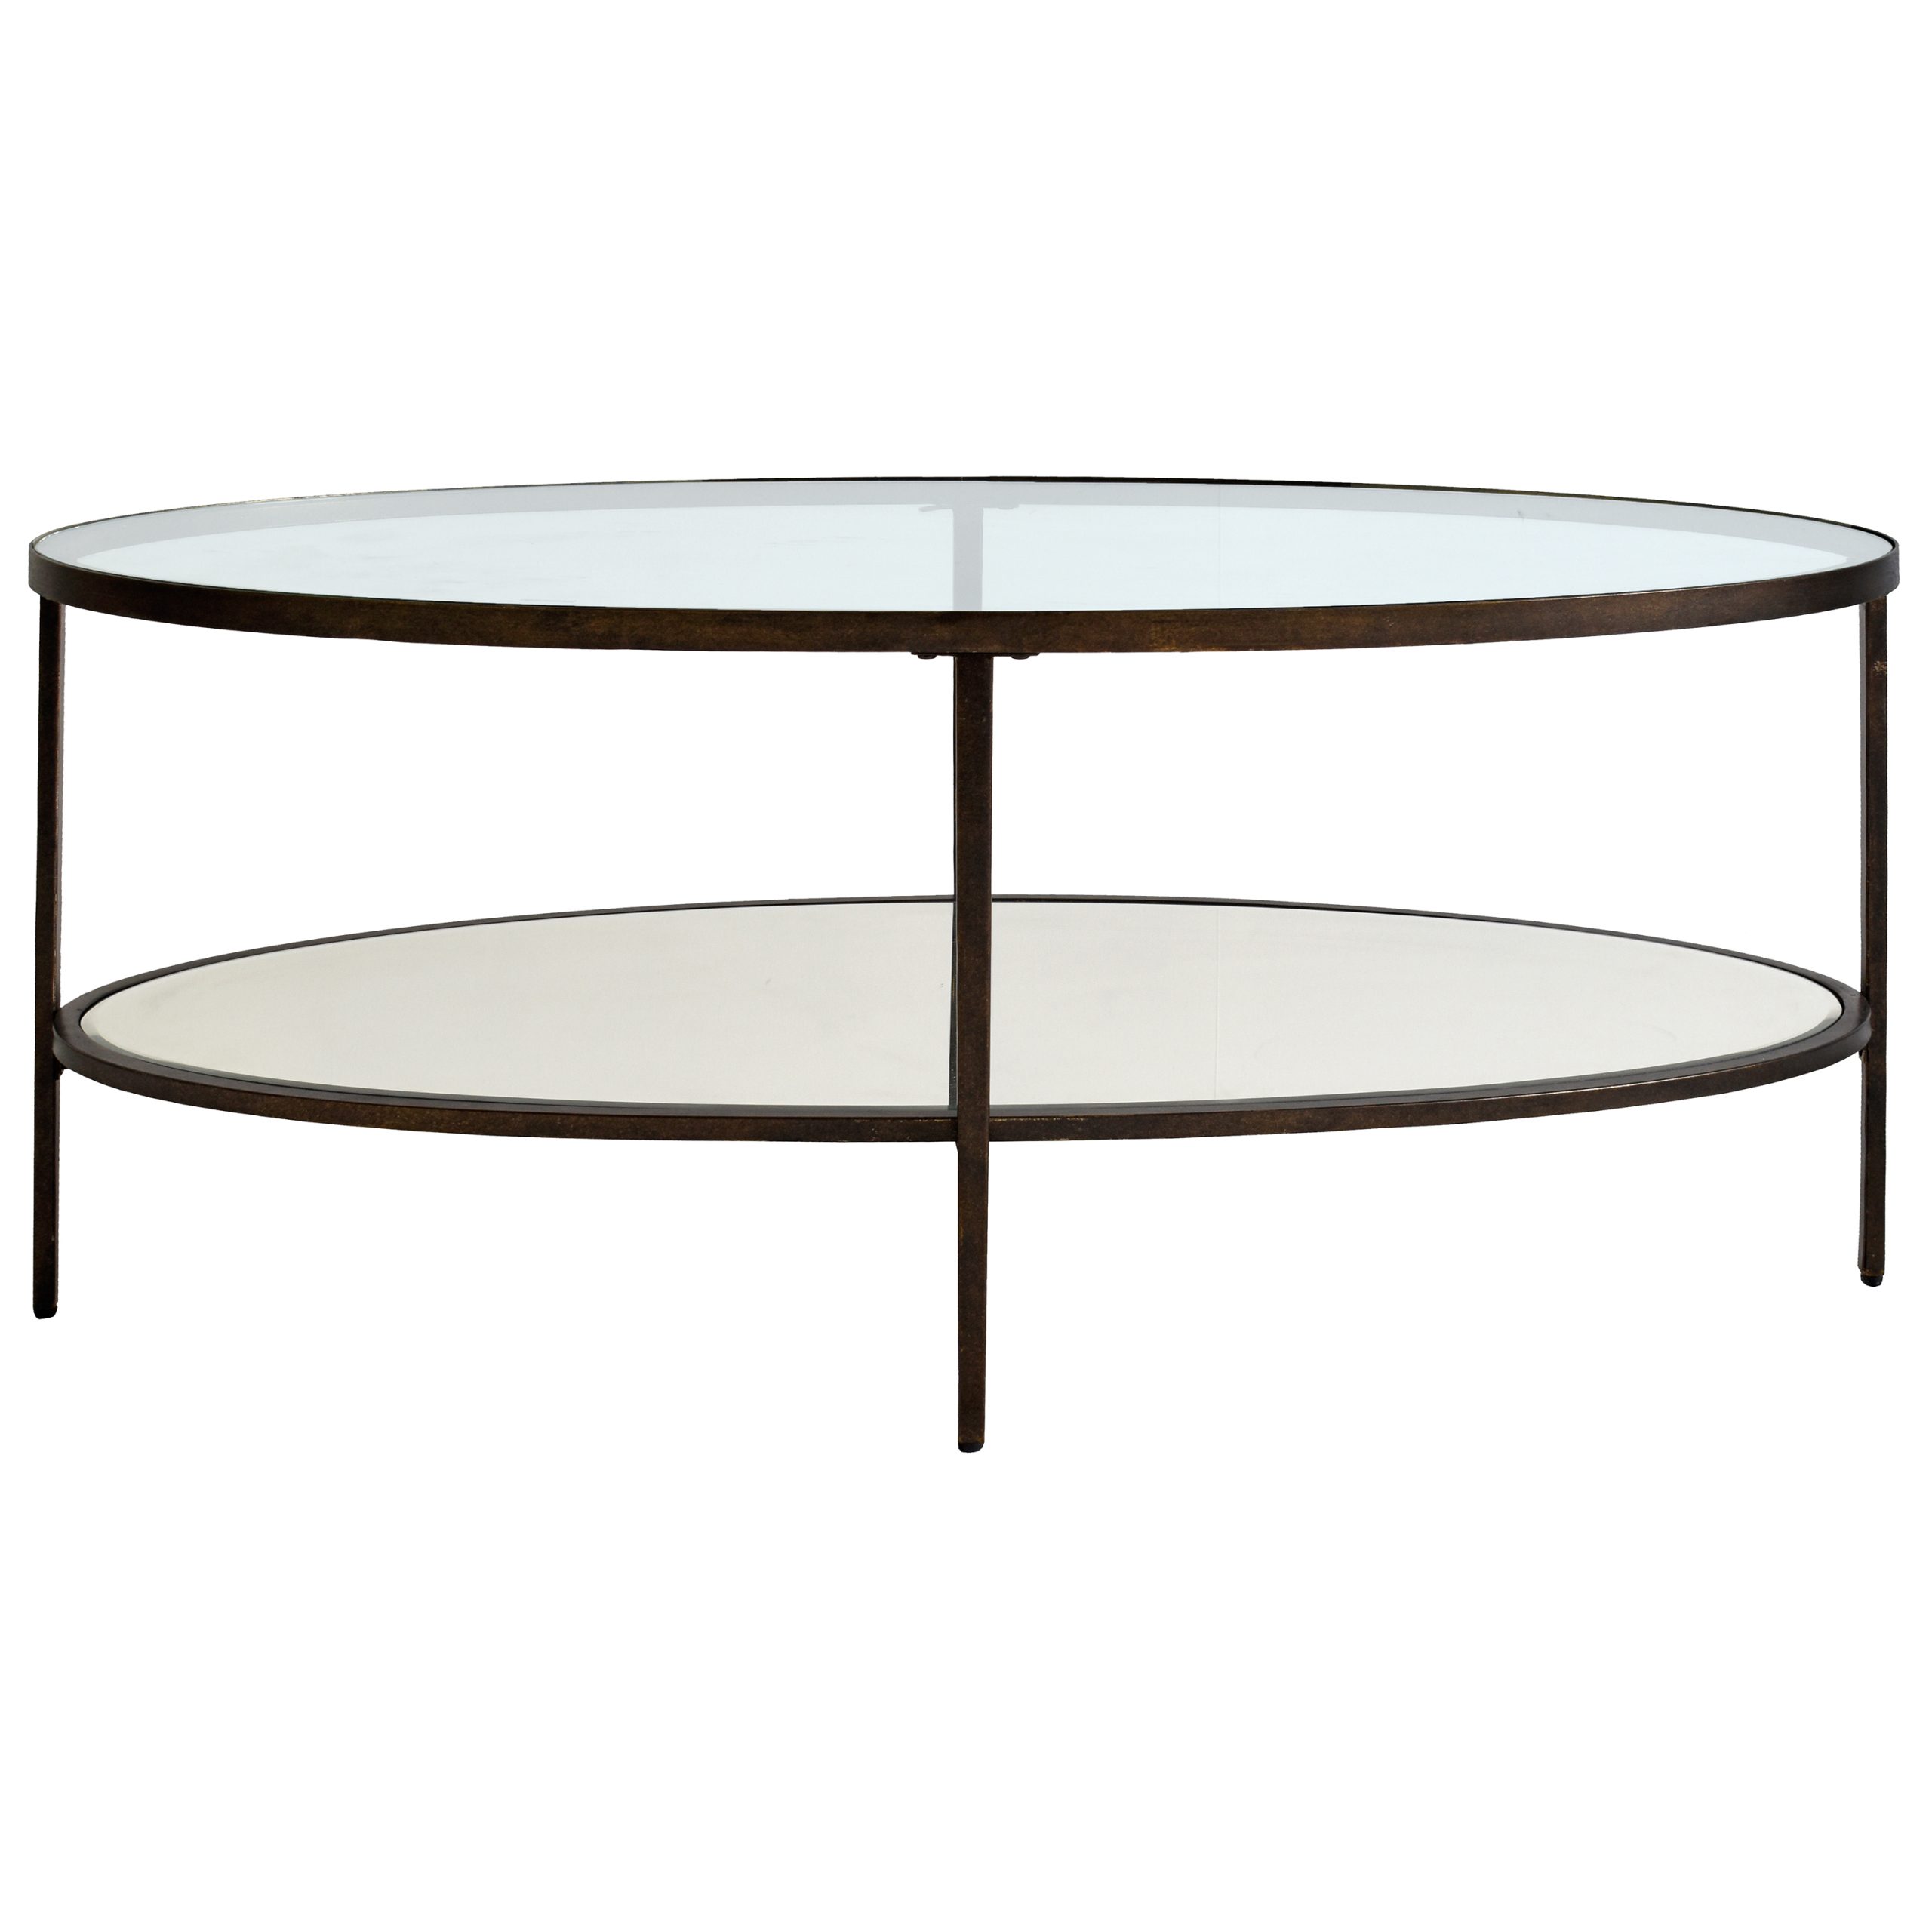 Gallery Direct Hudson Coffee Table